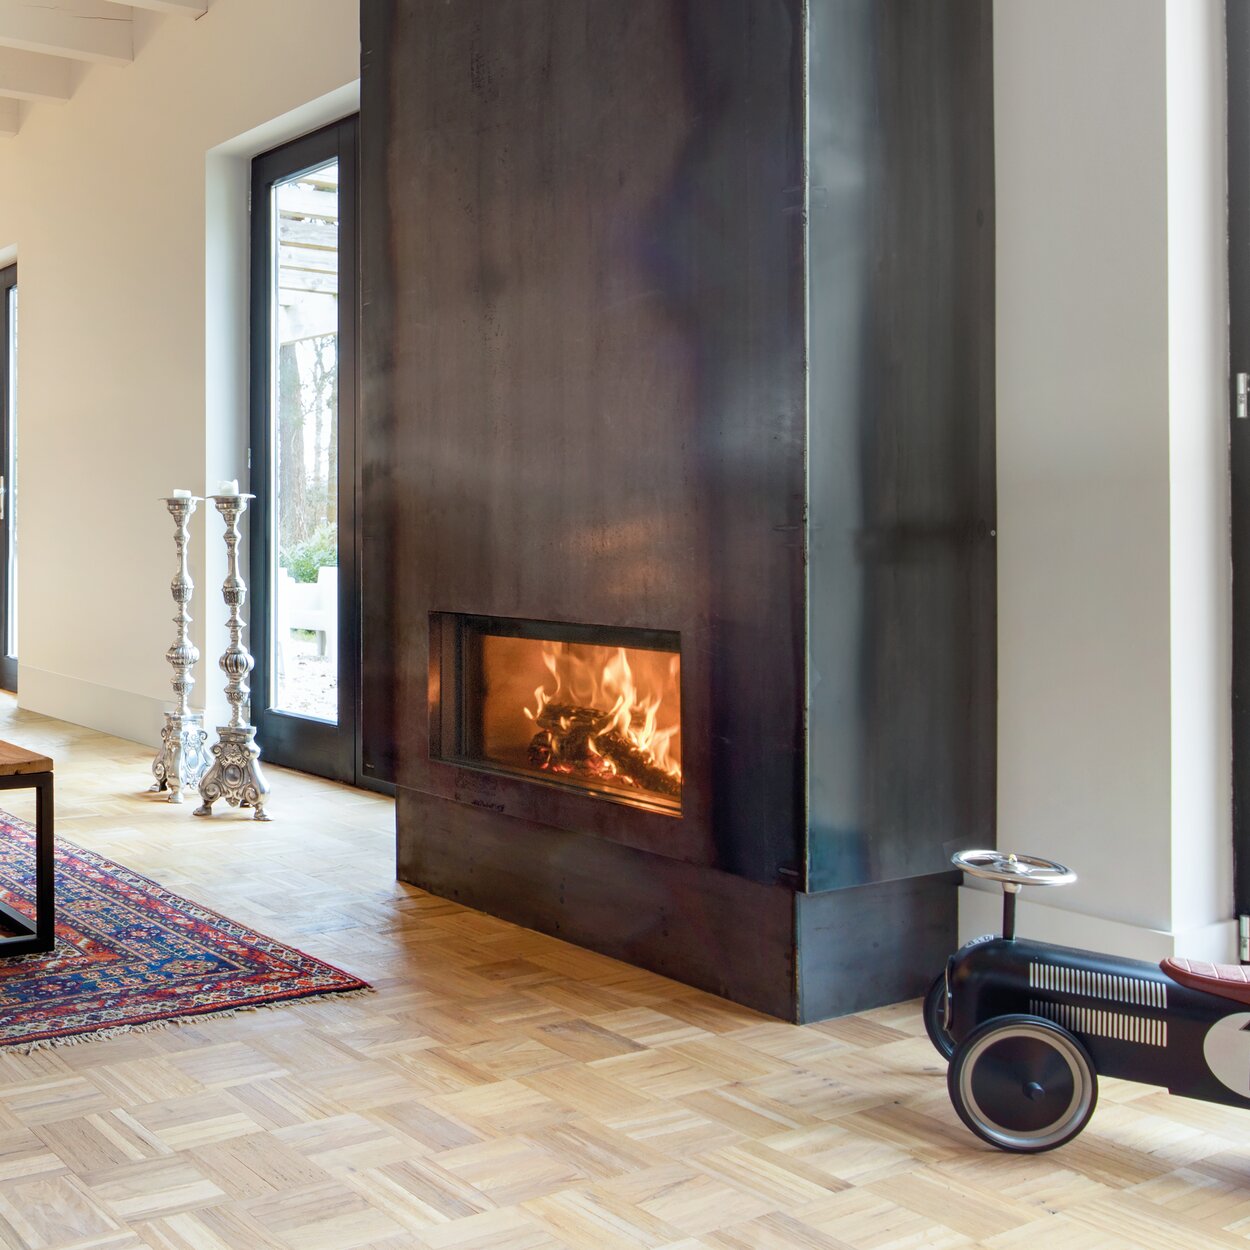 Wood fireplace W70/33F from Kalfire in a large, bright living room with black steel cladding next to a toy car